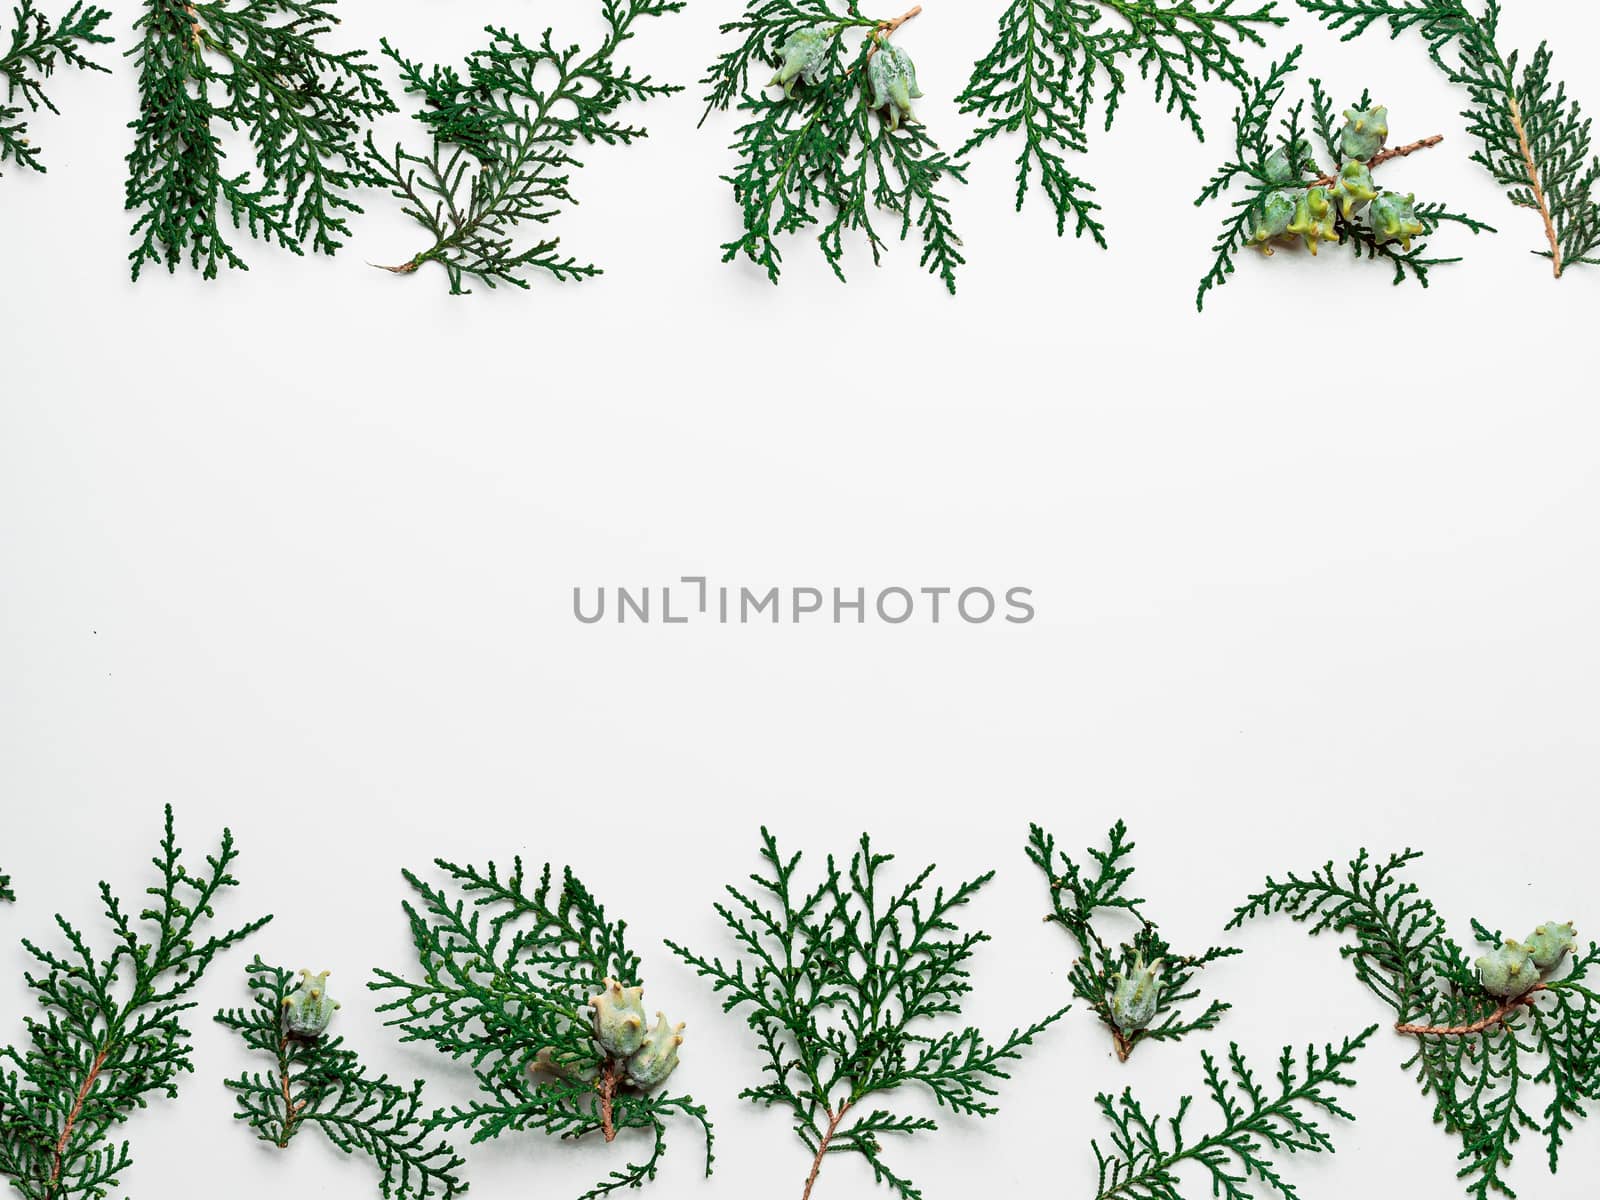 Minimal Christmas pattern with copy space. Fir tree or cypress branches on white background. Negative space for text or design in center. Christmas, winter, new year concept. Flat lay, top view